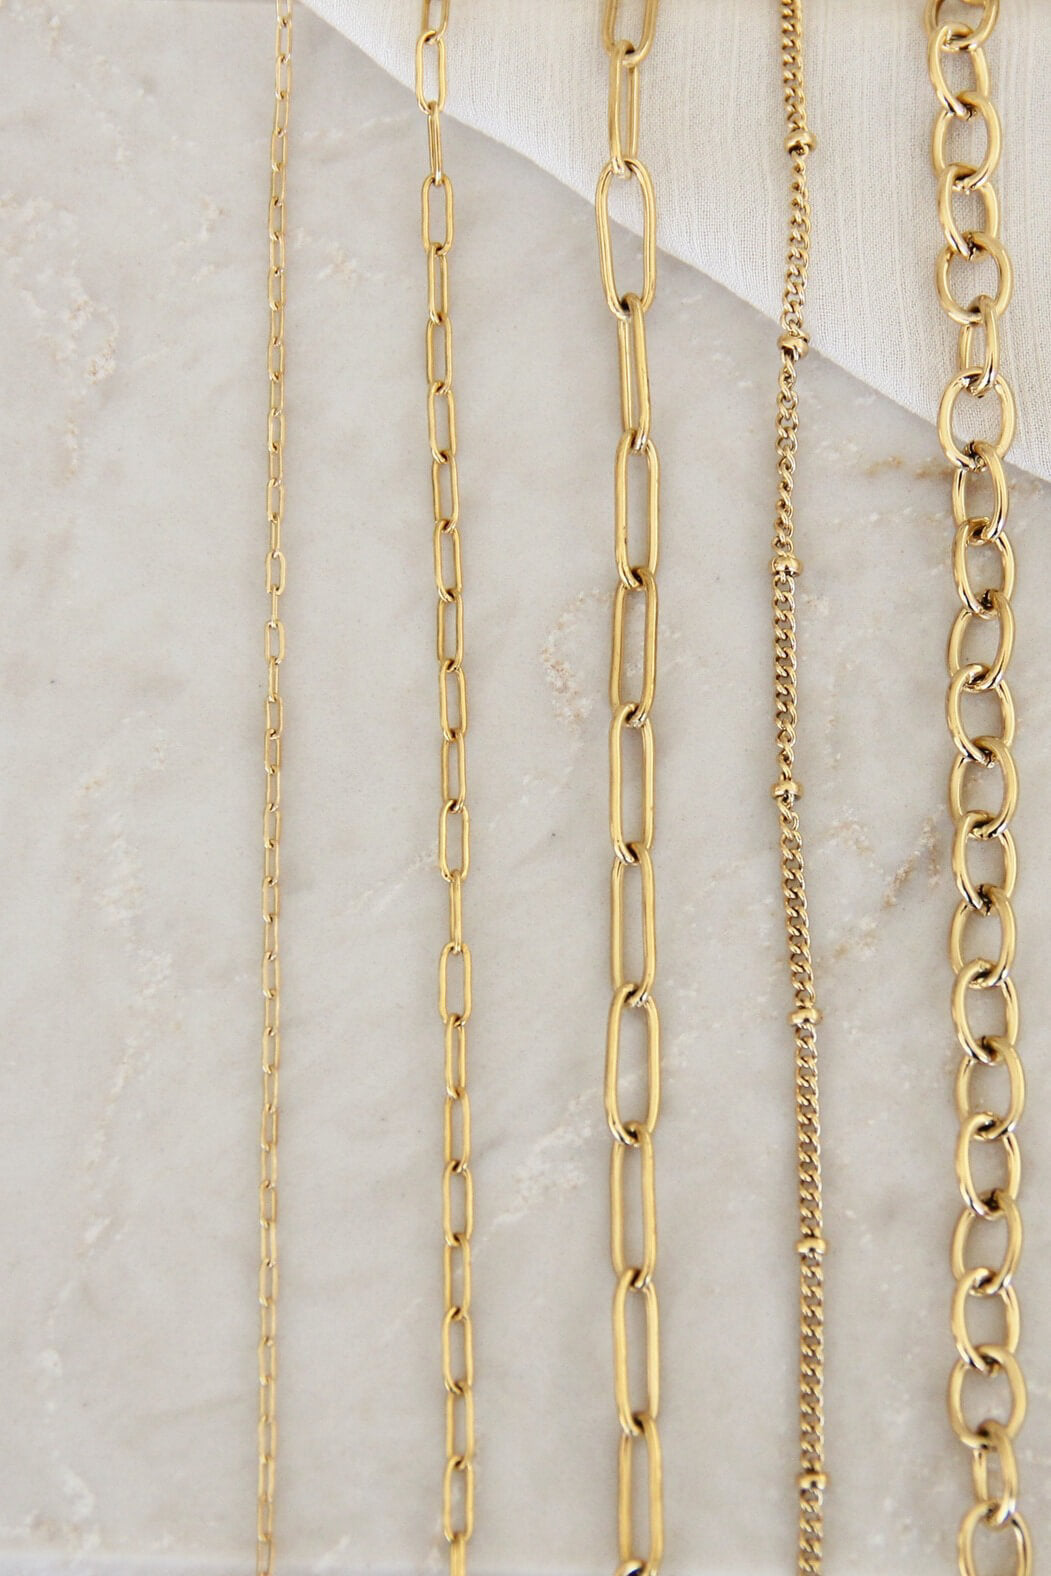 Maive Jewlery large paperclip chain bracelet in 18k gold